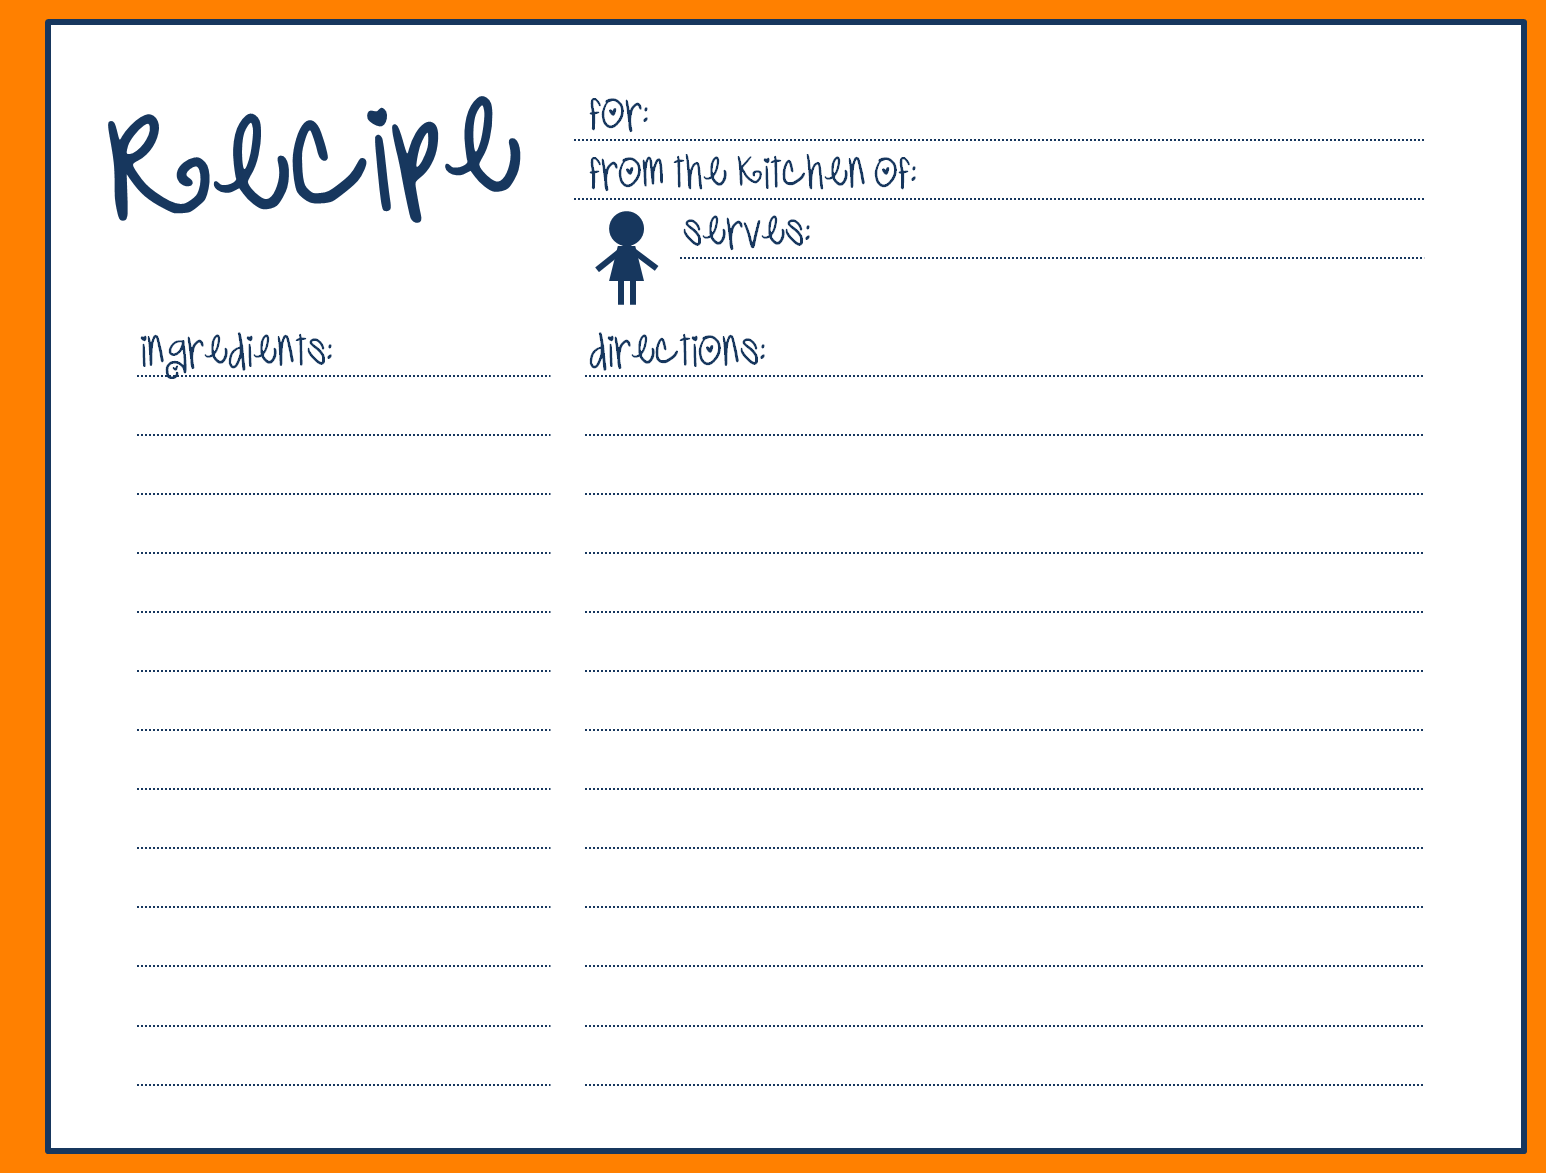 How Do You Make A 4x6 Recipe Card In Word Image Of Food Recipe